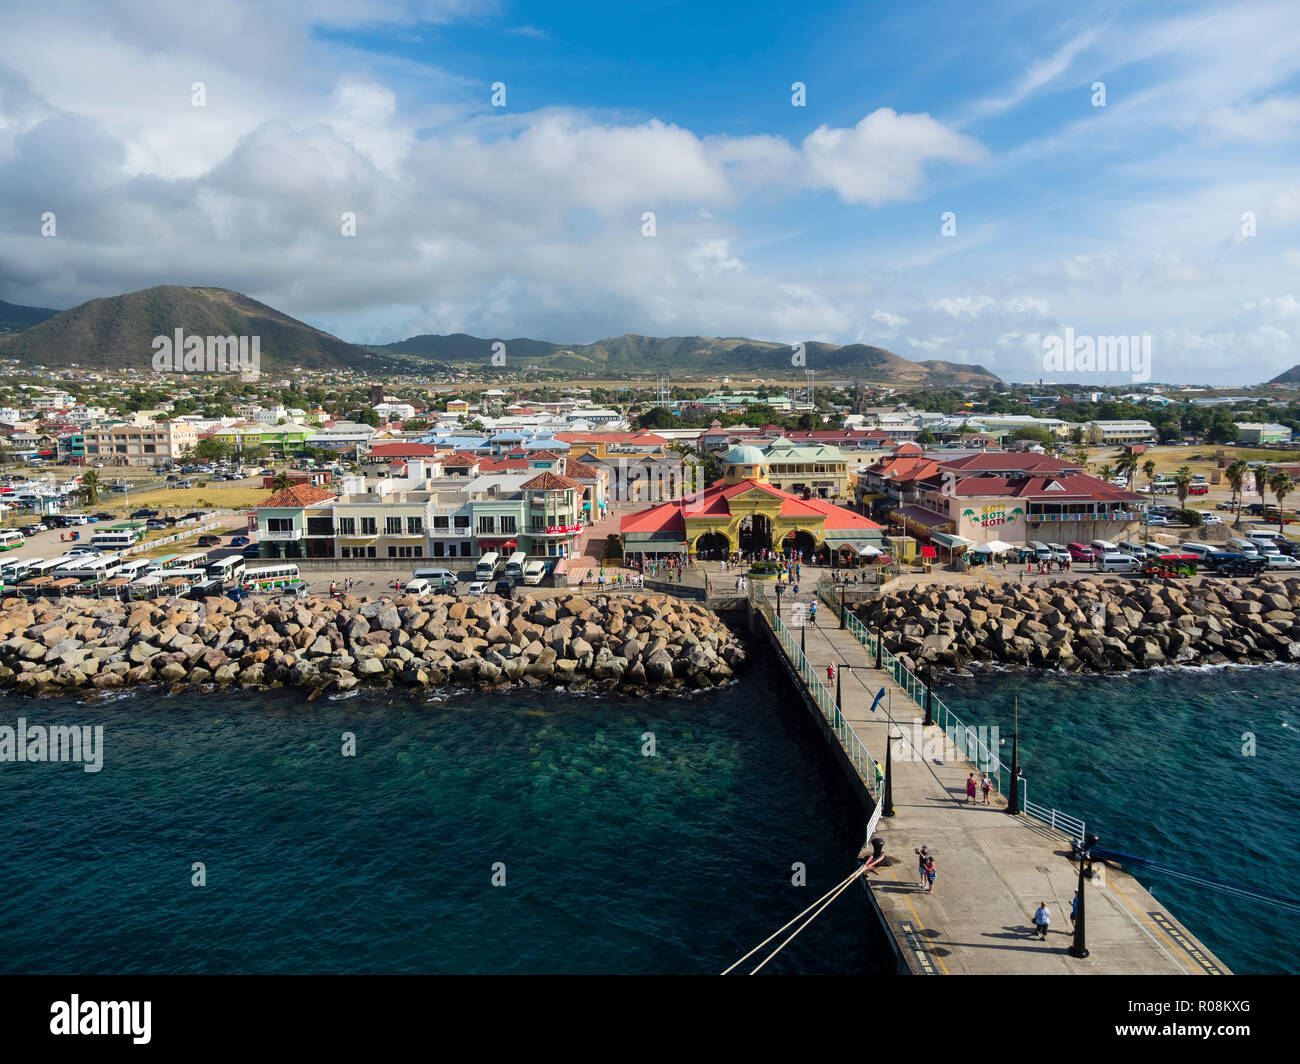 Entrance to the ports of Basseterre, Saint Kitts and Nevis Stock Photo